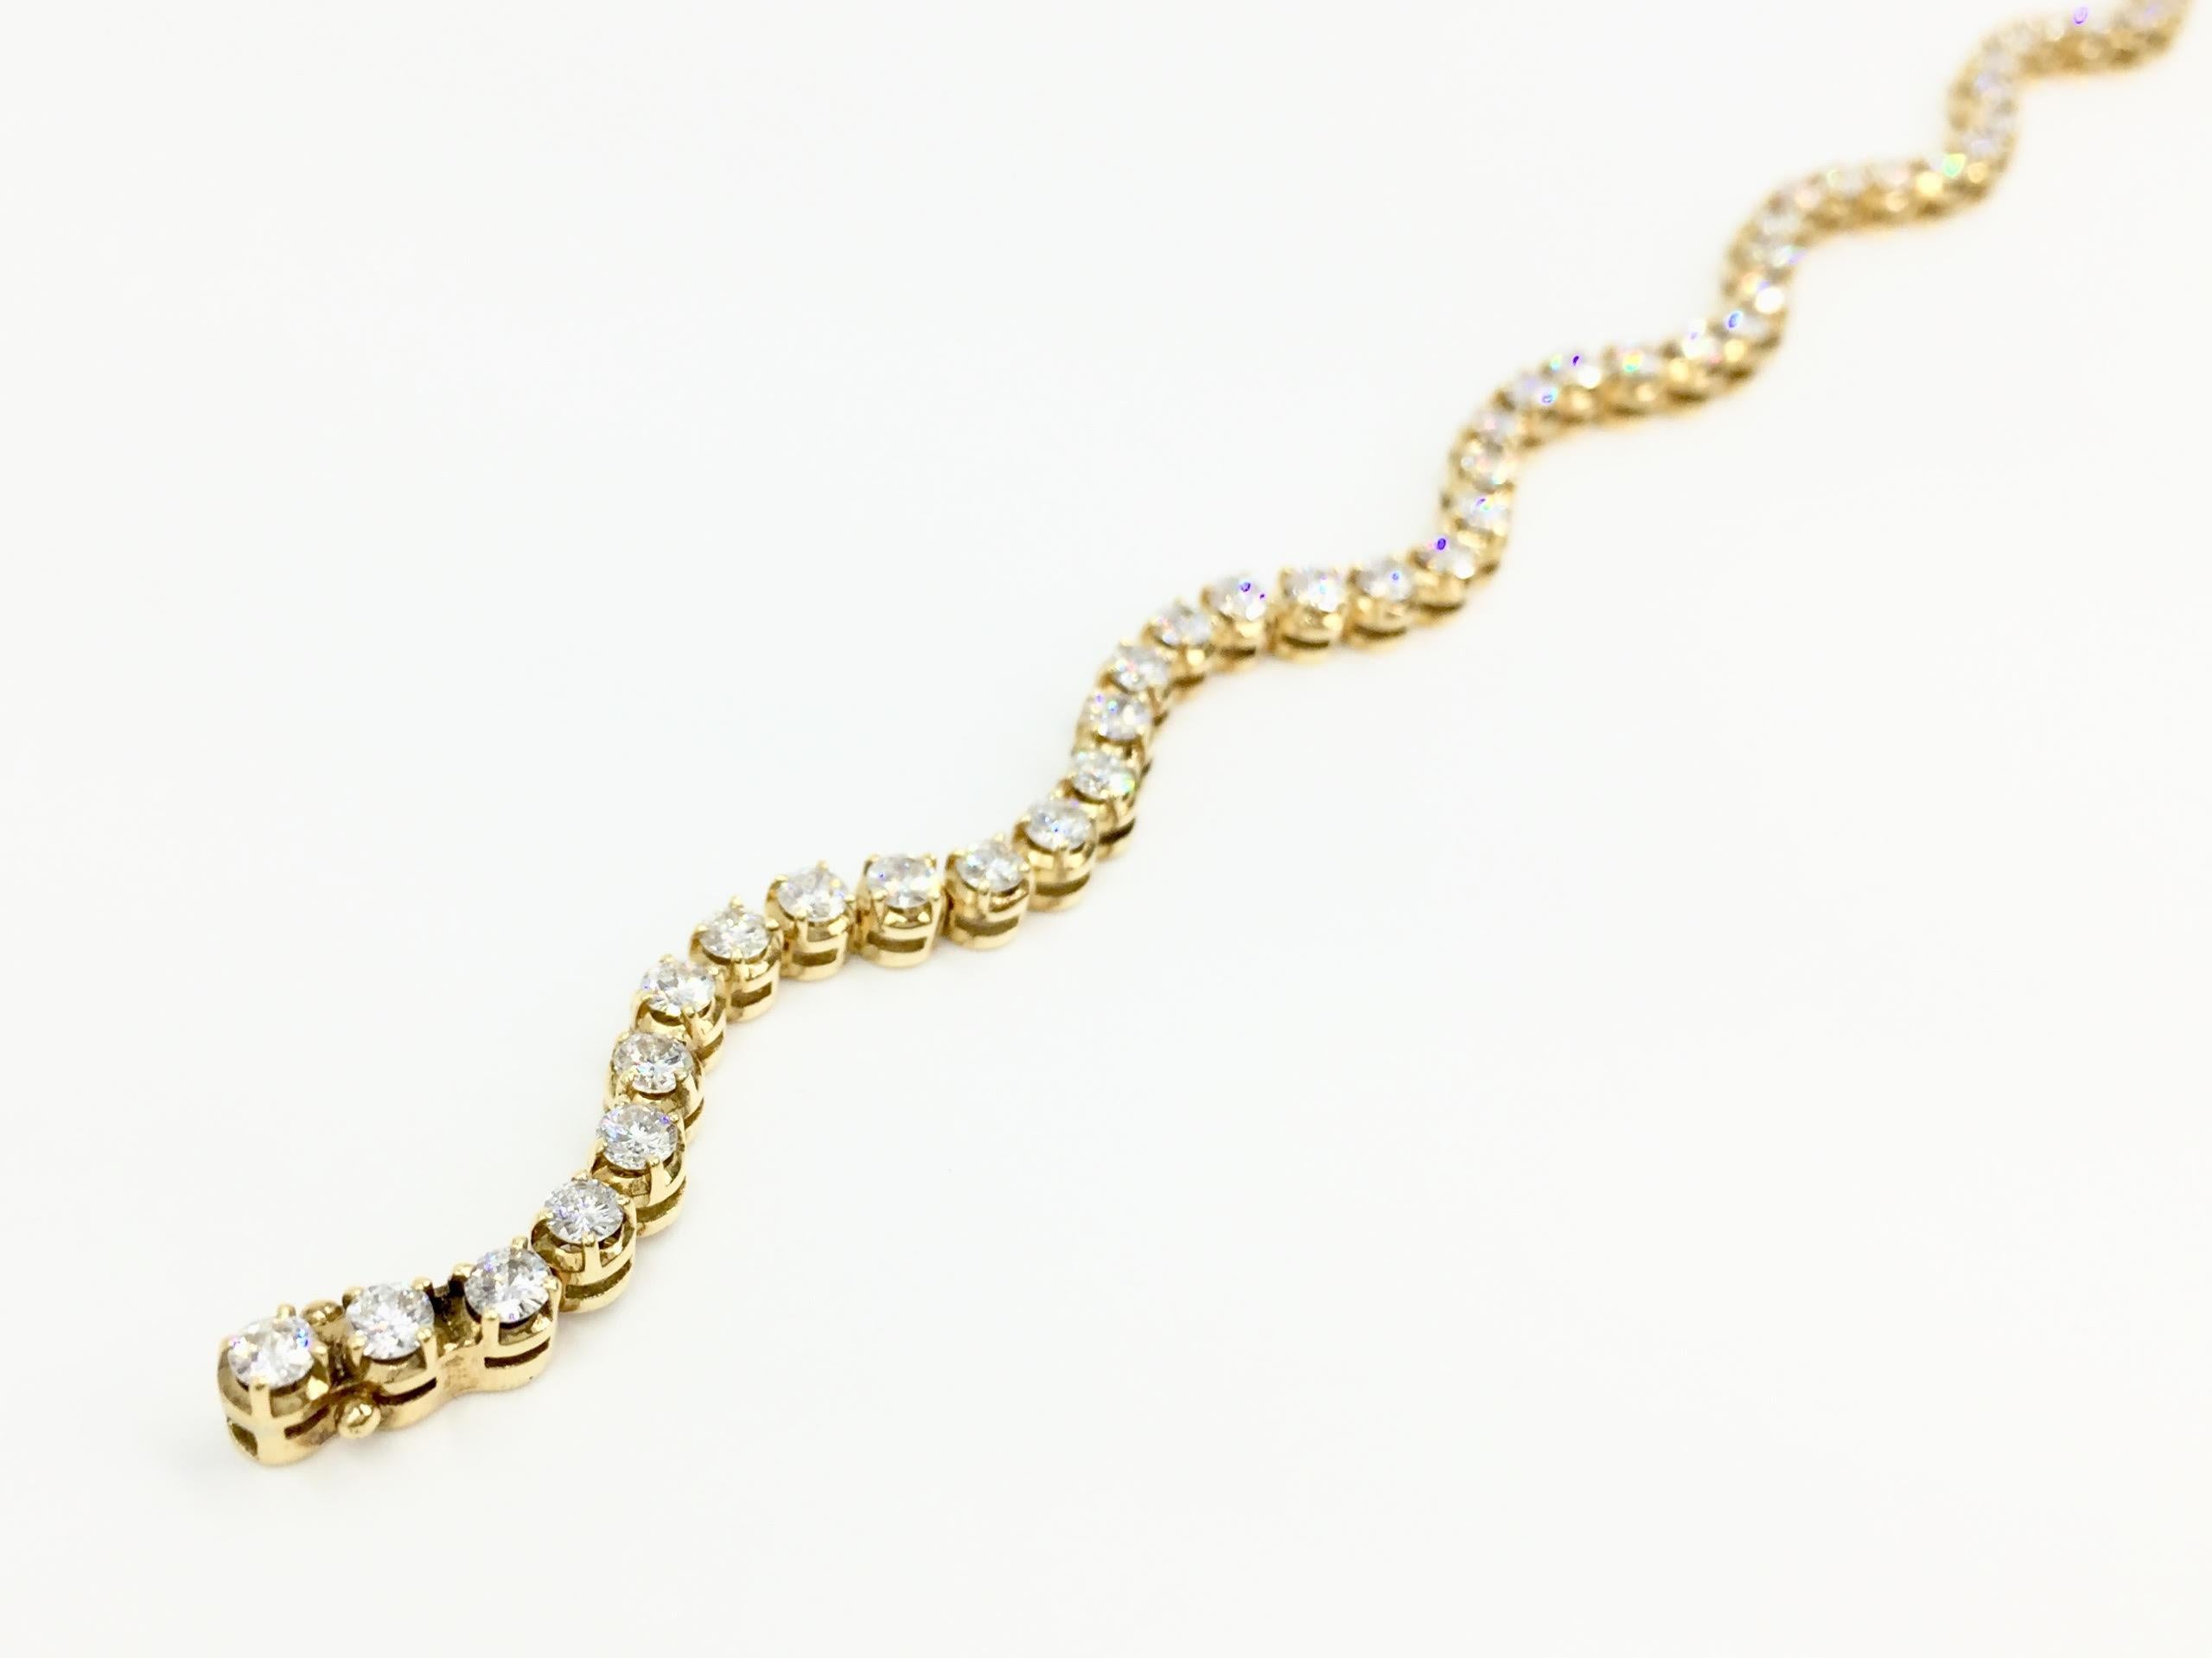 From superior diamond jewelry designer PeJay Creations, a unique twist on the usual diamond tennis bracelet. This wave design in 18 karat yellow gold features 3.93 carats of high quality round brilliant diamonds, approximately E color, VS1 clarity.